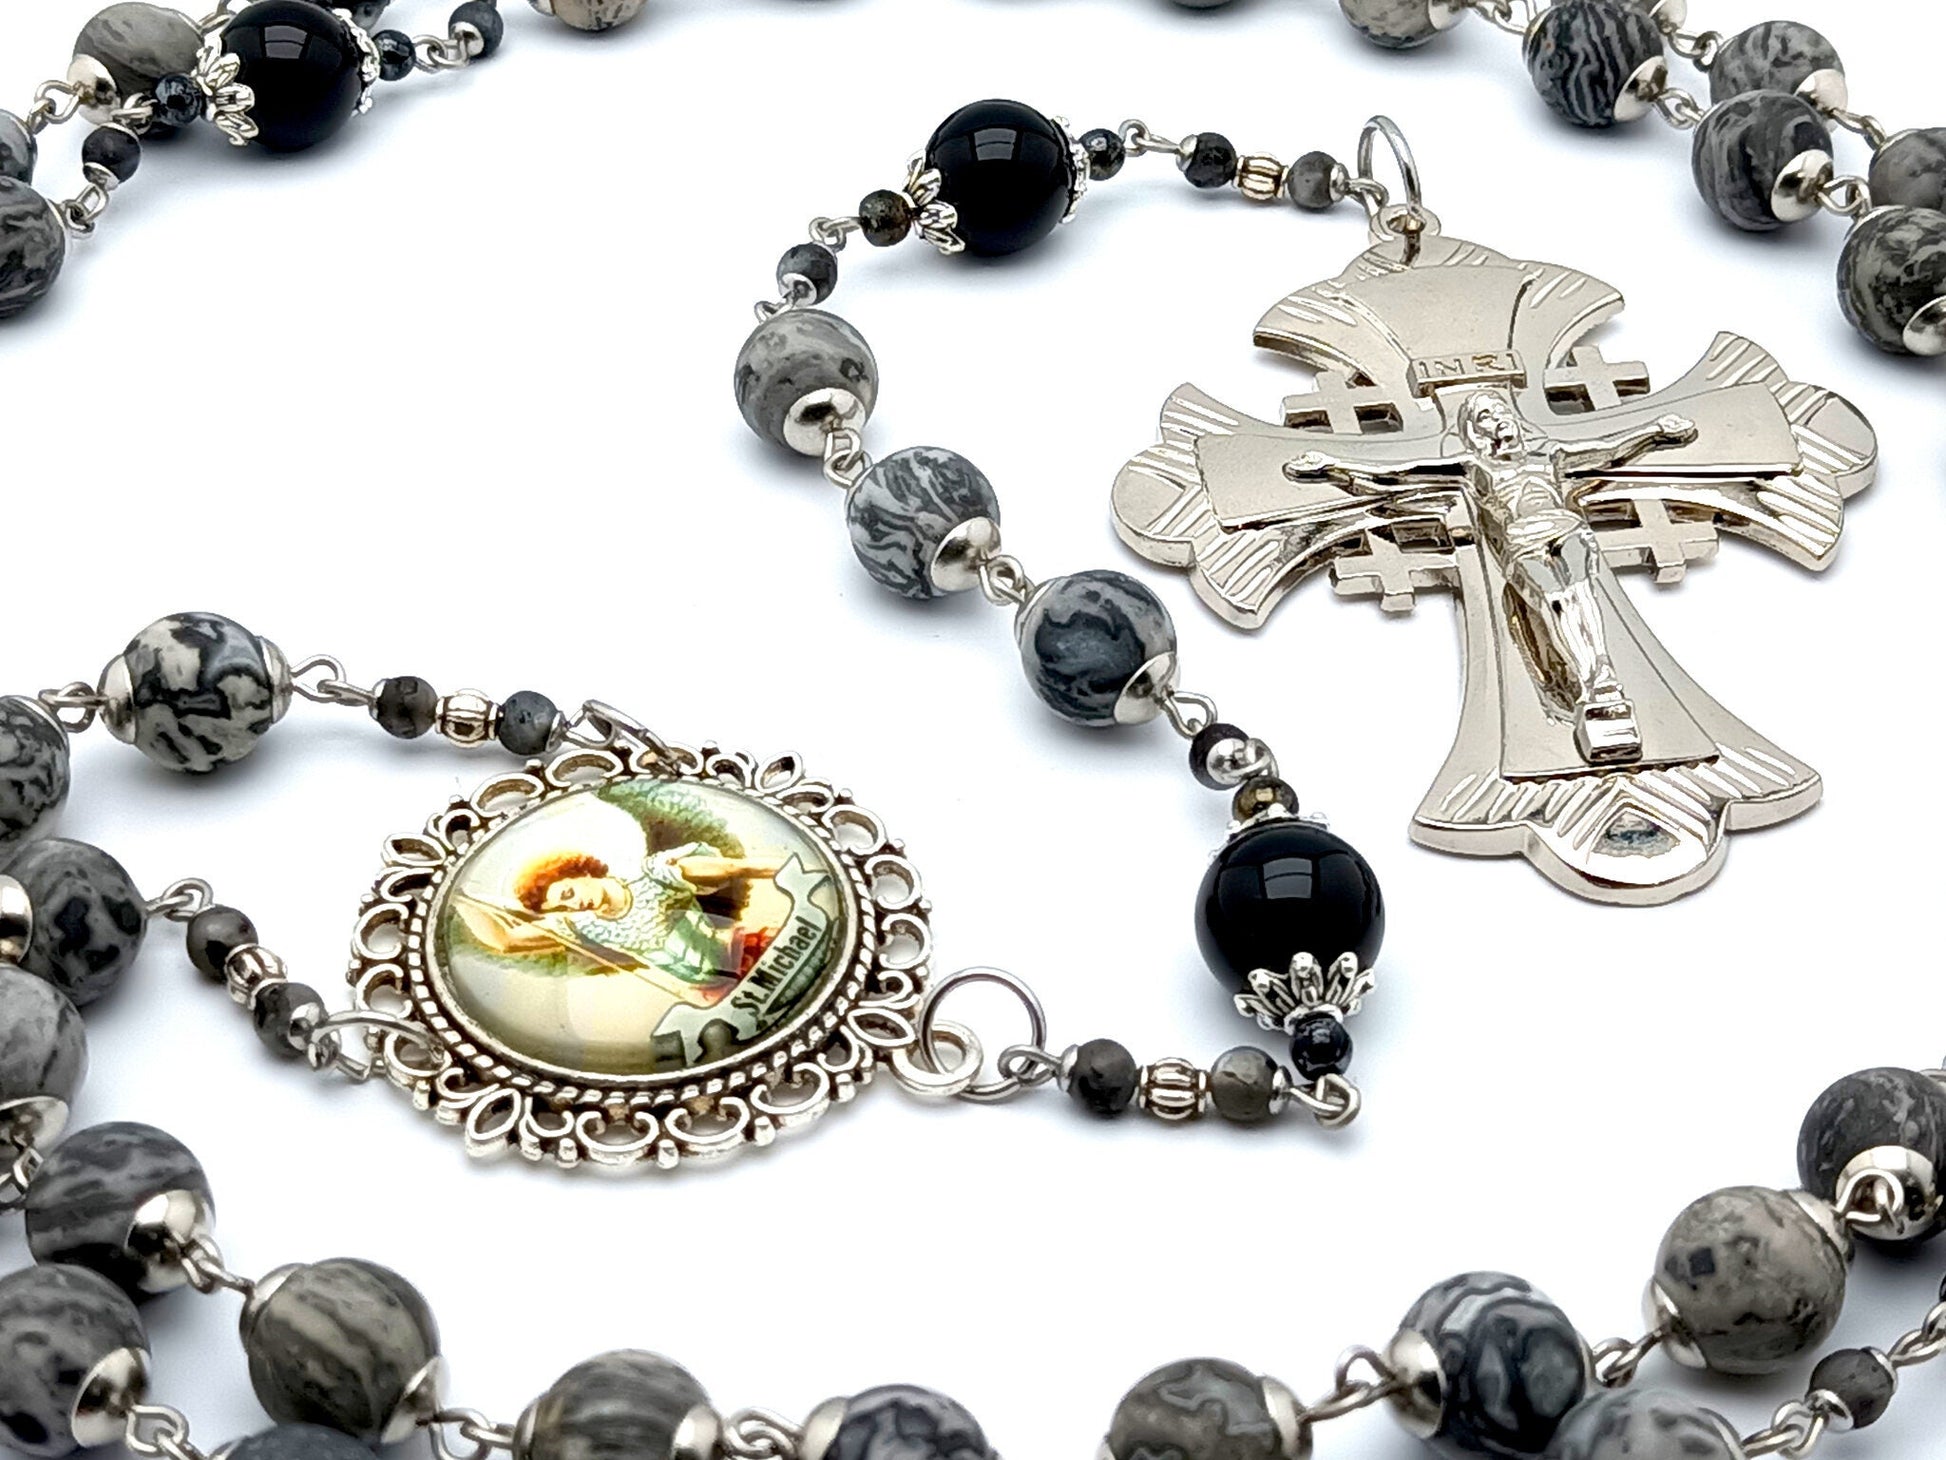 Saint Michael unique rosary beads with lavakite and onyx gemstone beads, large silver plated crucifix and picture centre medal.